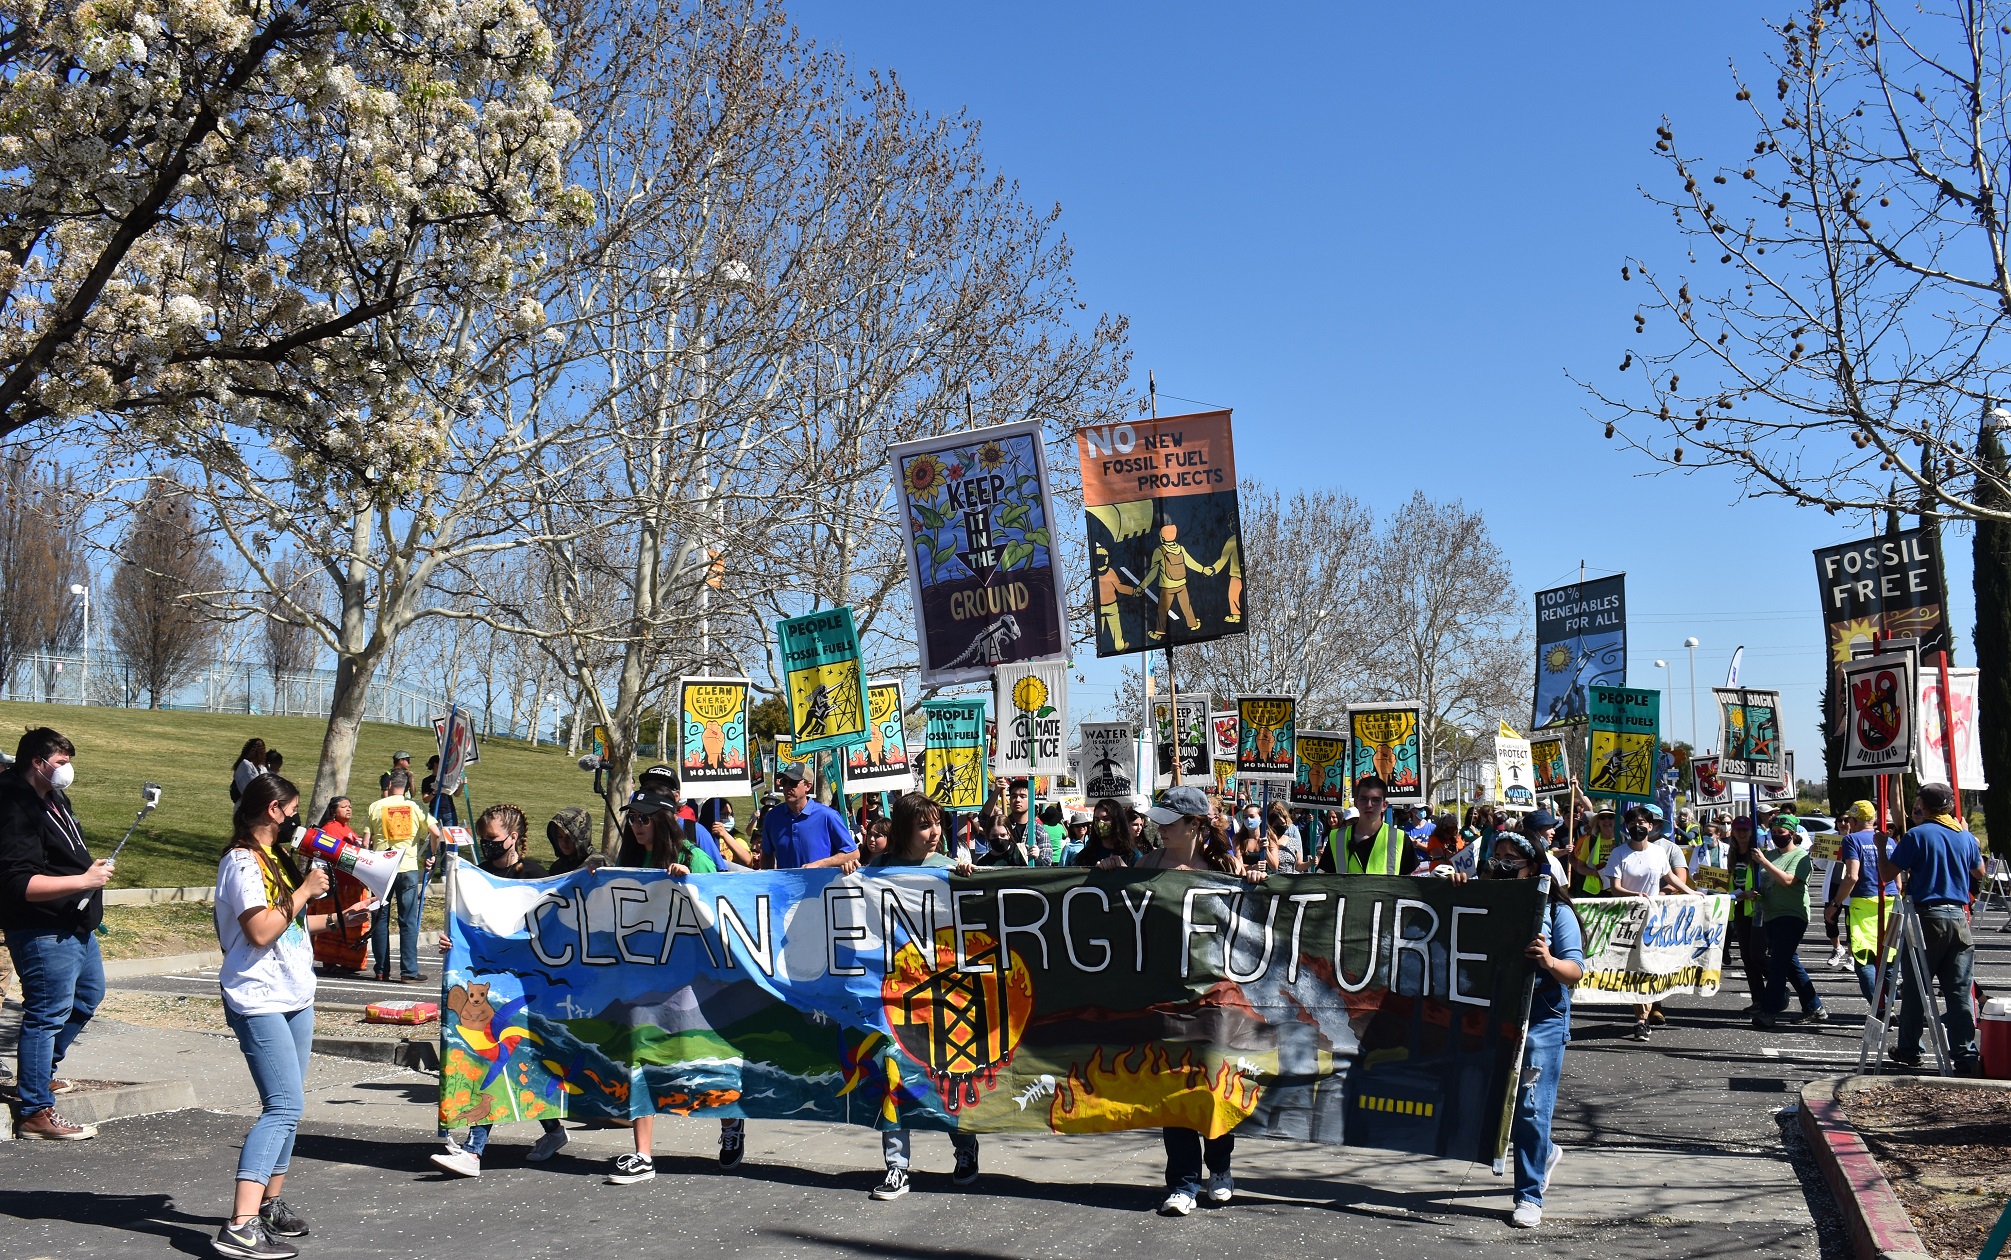 Clean Energy demonstrators marching in Antioch for a Clean Energy Future